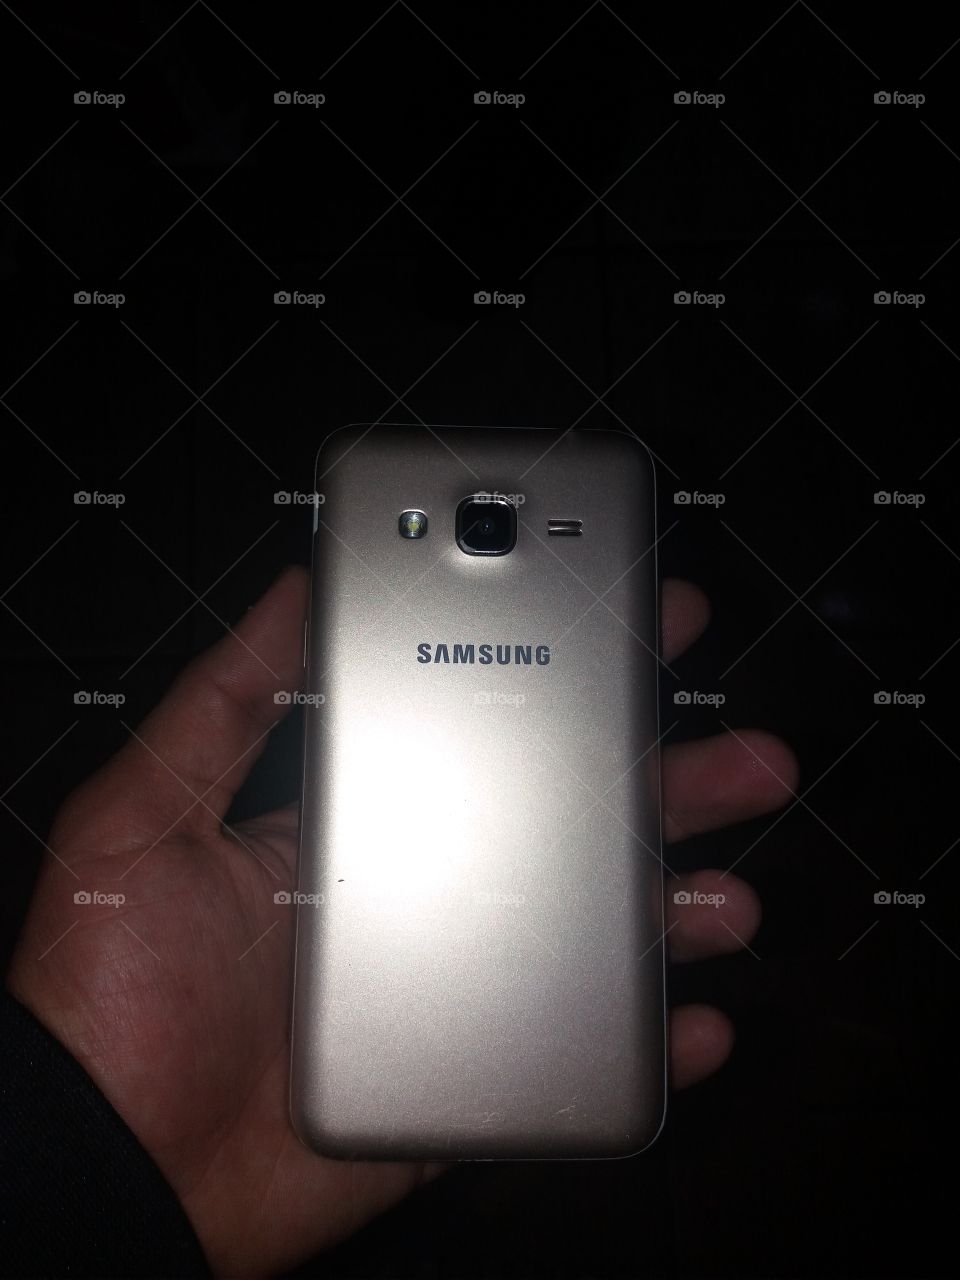 mobile#android#Samsung#hand#camera